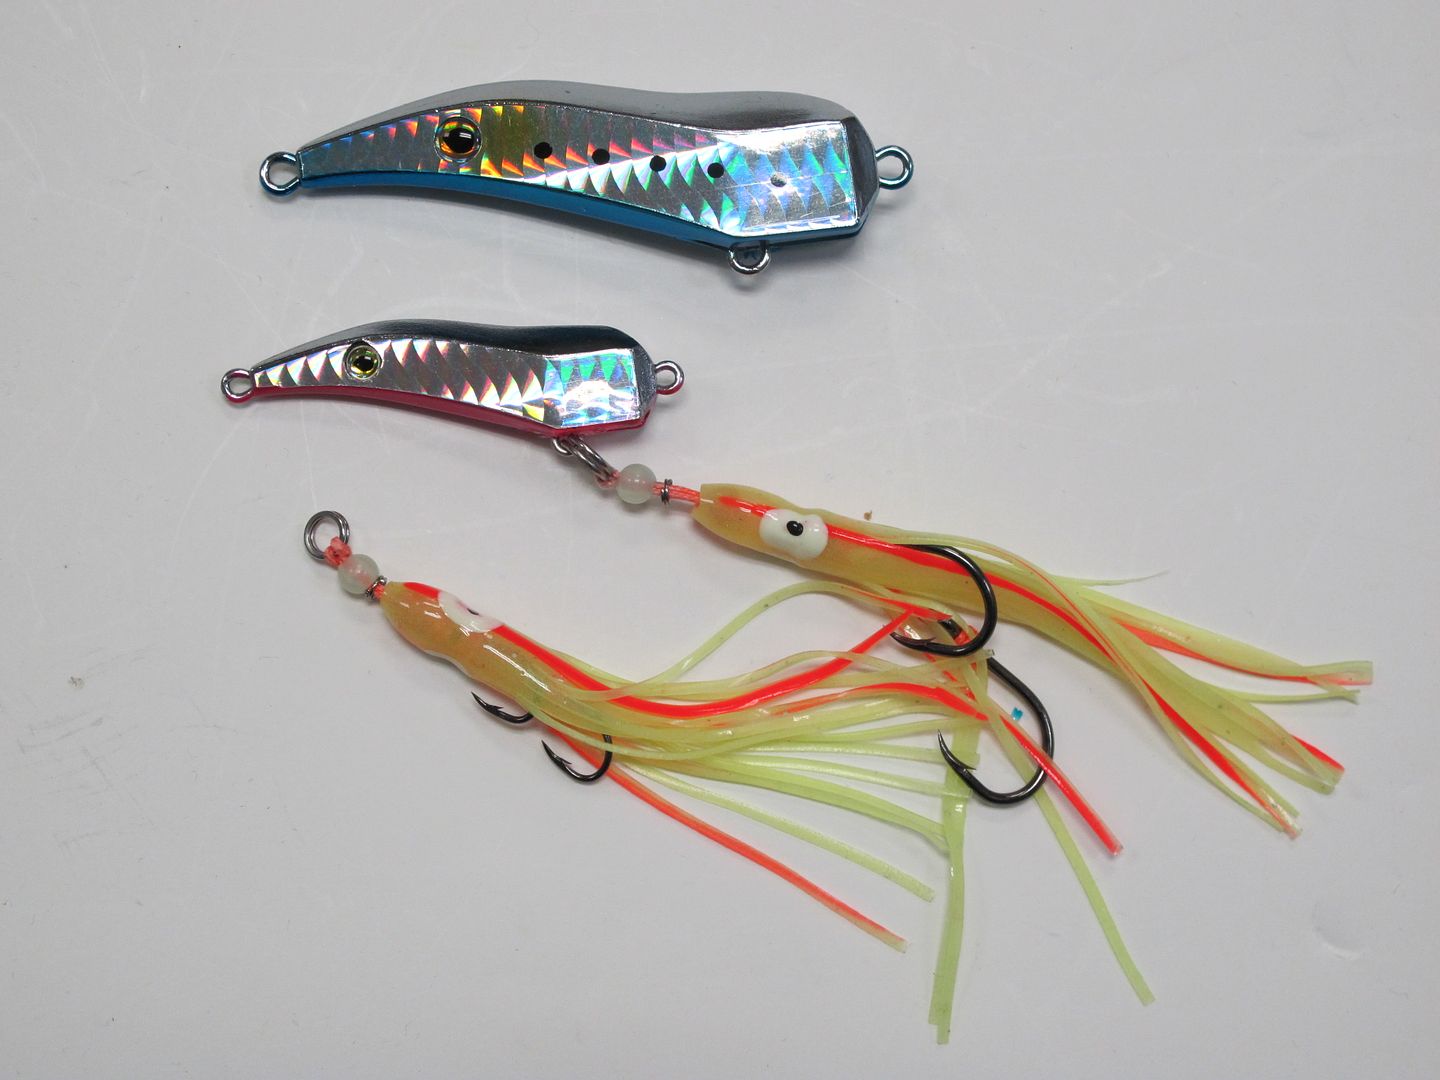 New fluke killer jigs - Page 2 - Saltwater Fishing Discussion Board ...